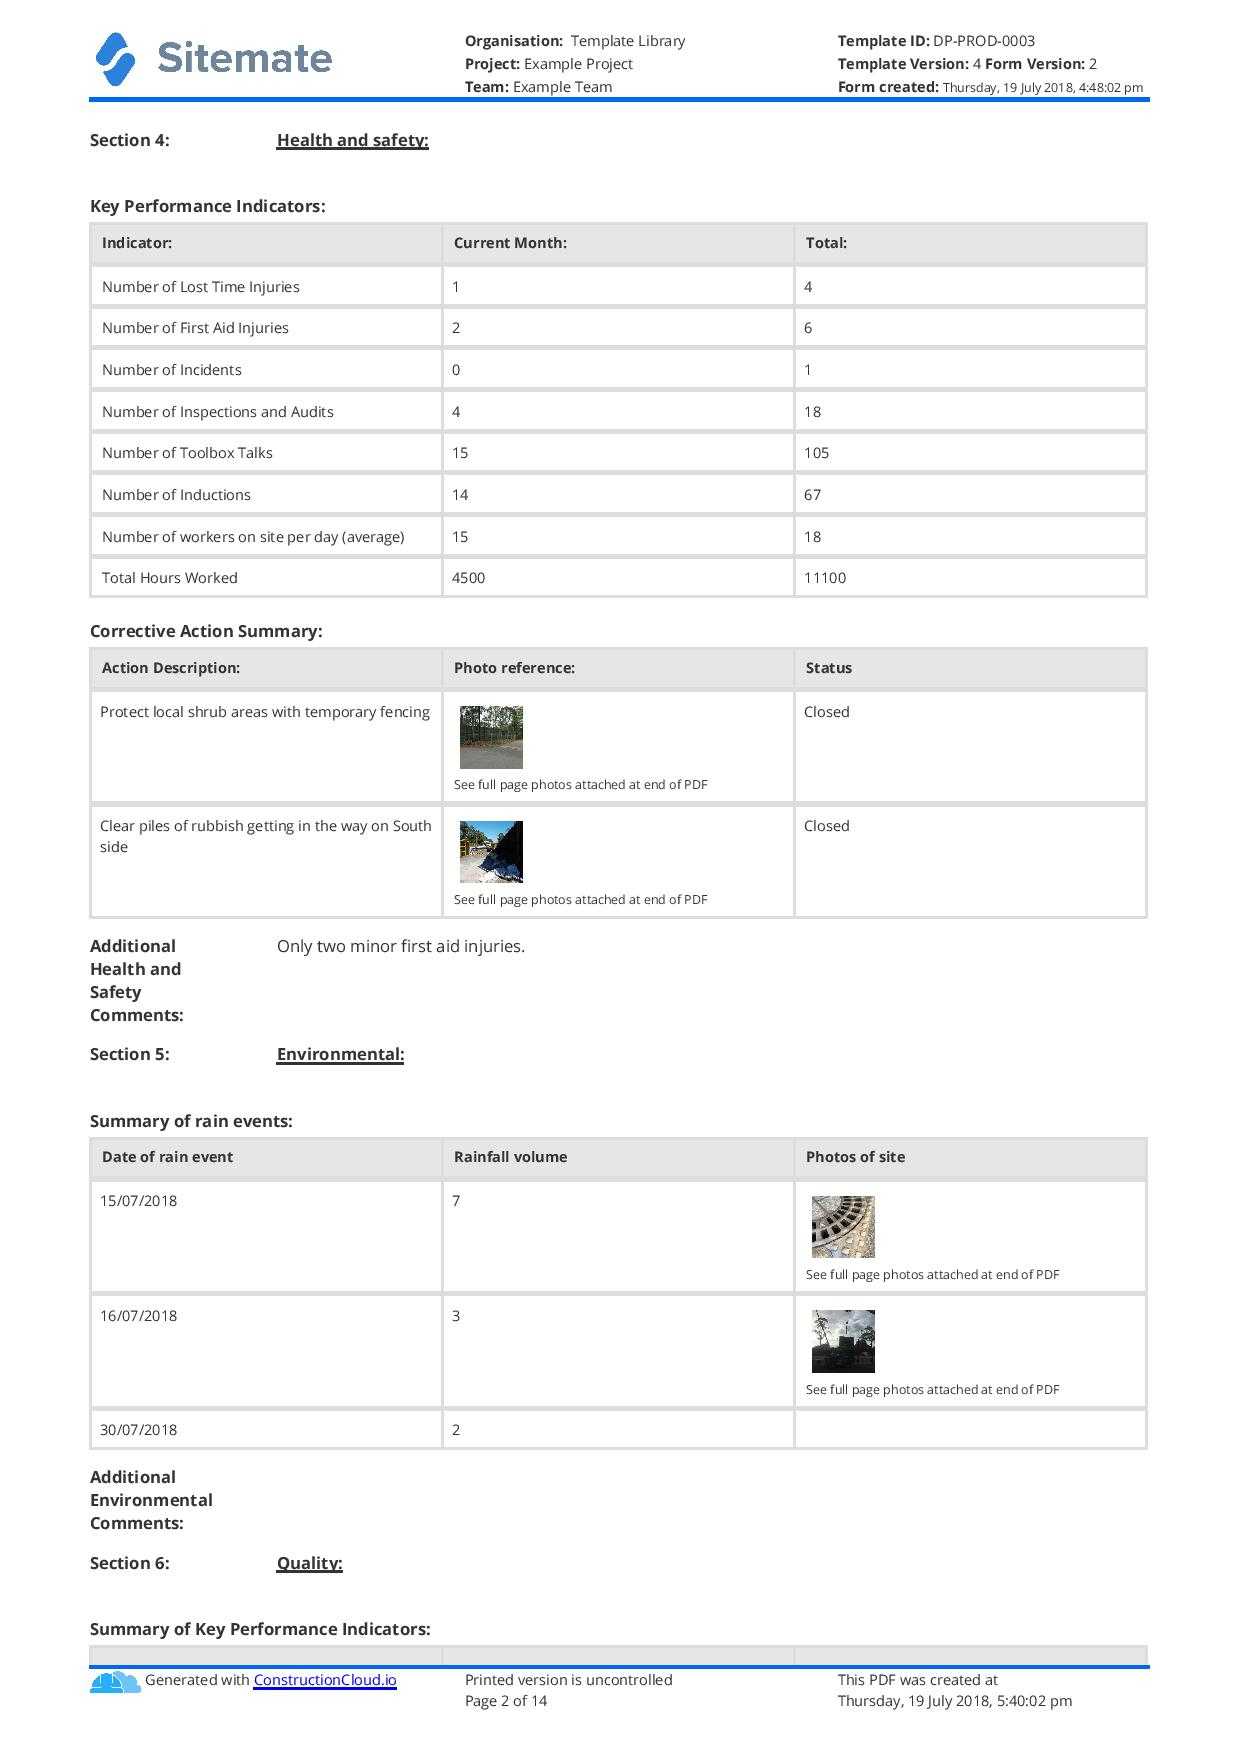 Monthly Construction Progress Report Template: Use This Throughout Progress Report Template For Construction Project